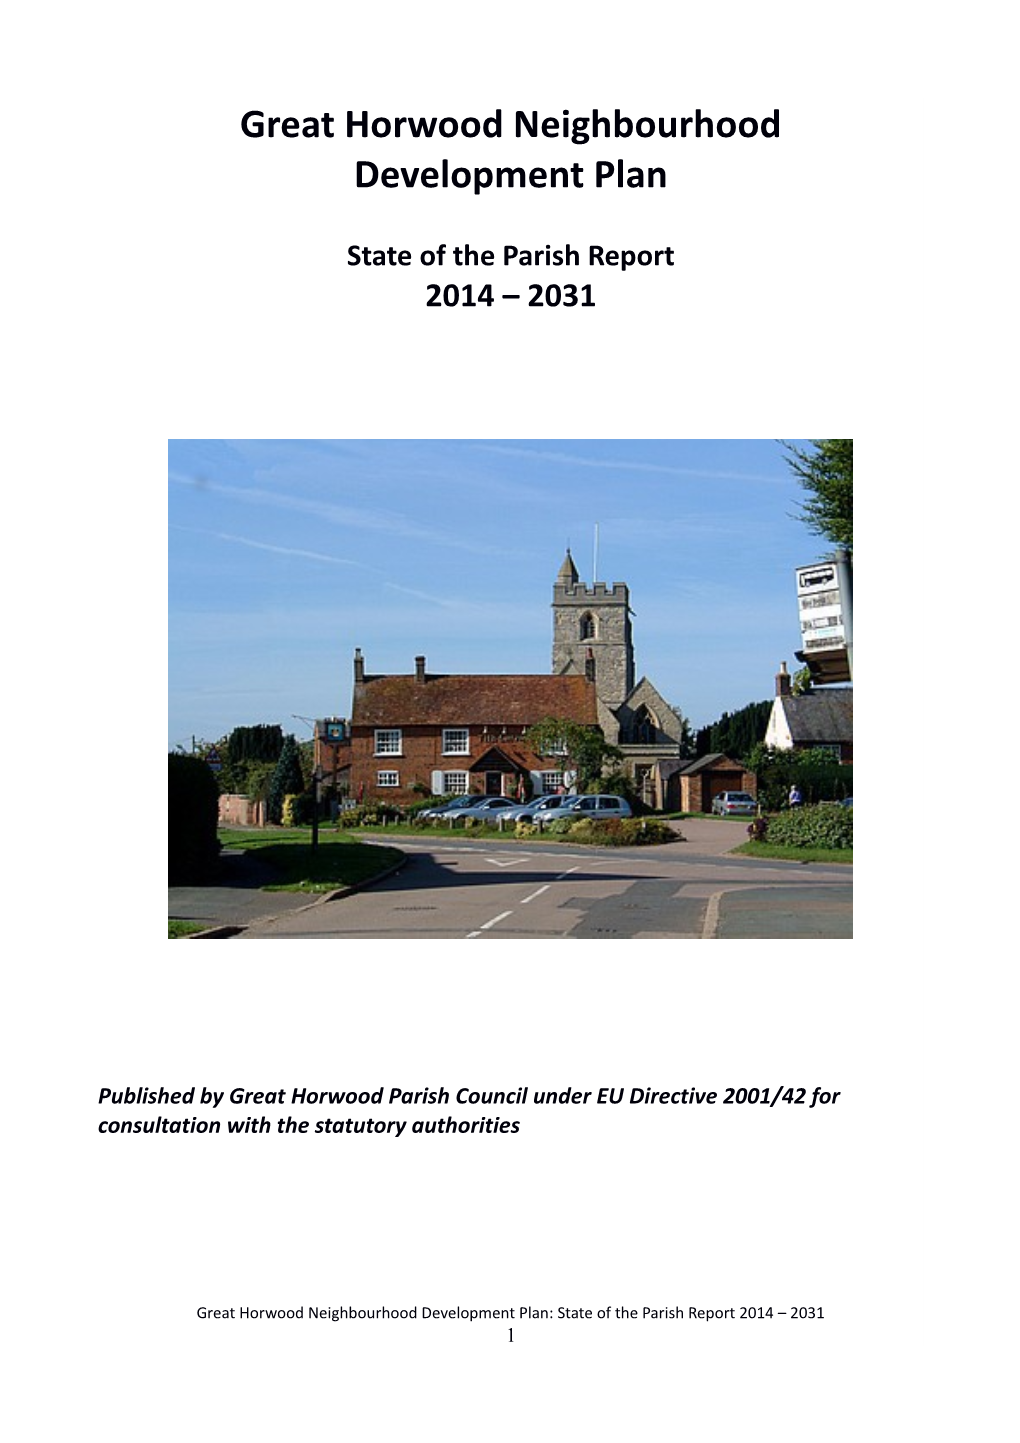 Great Horwood State of the Parish